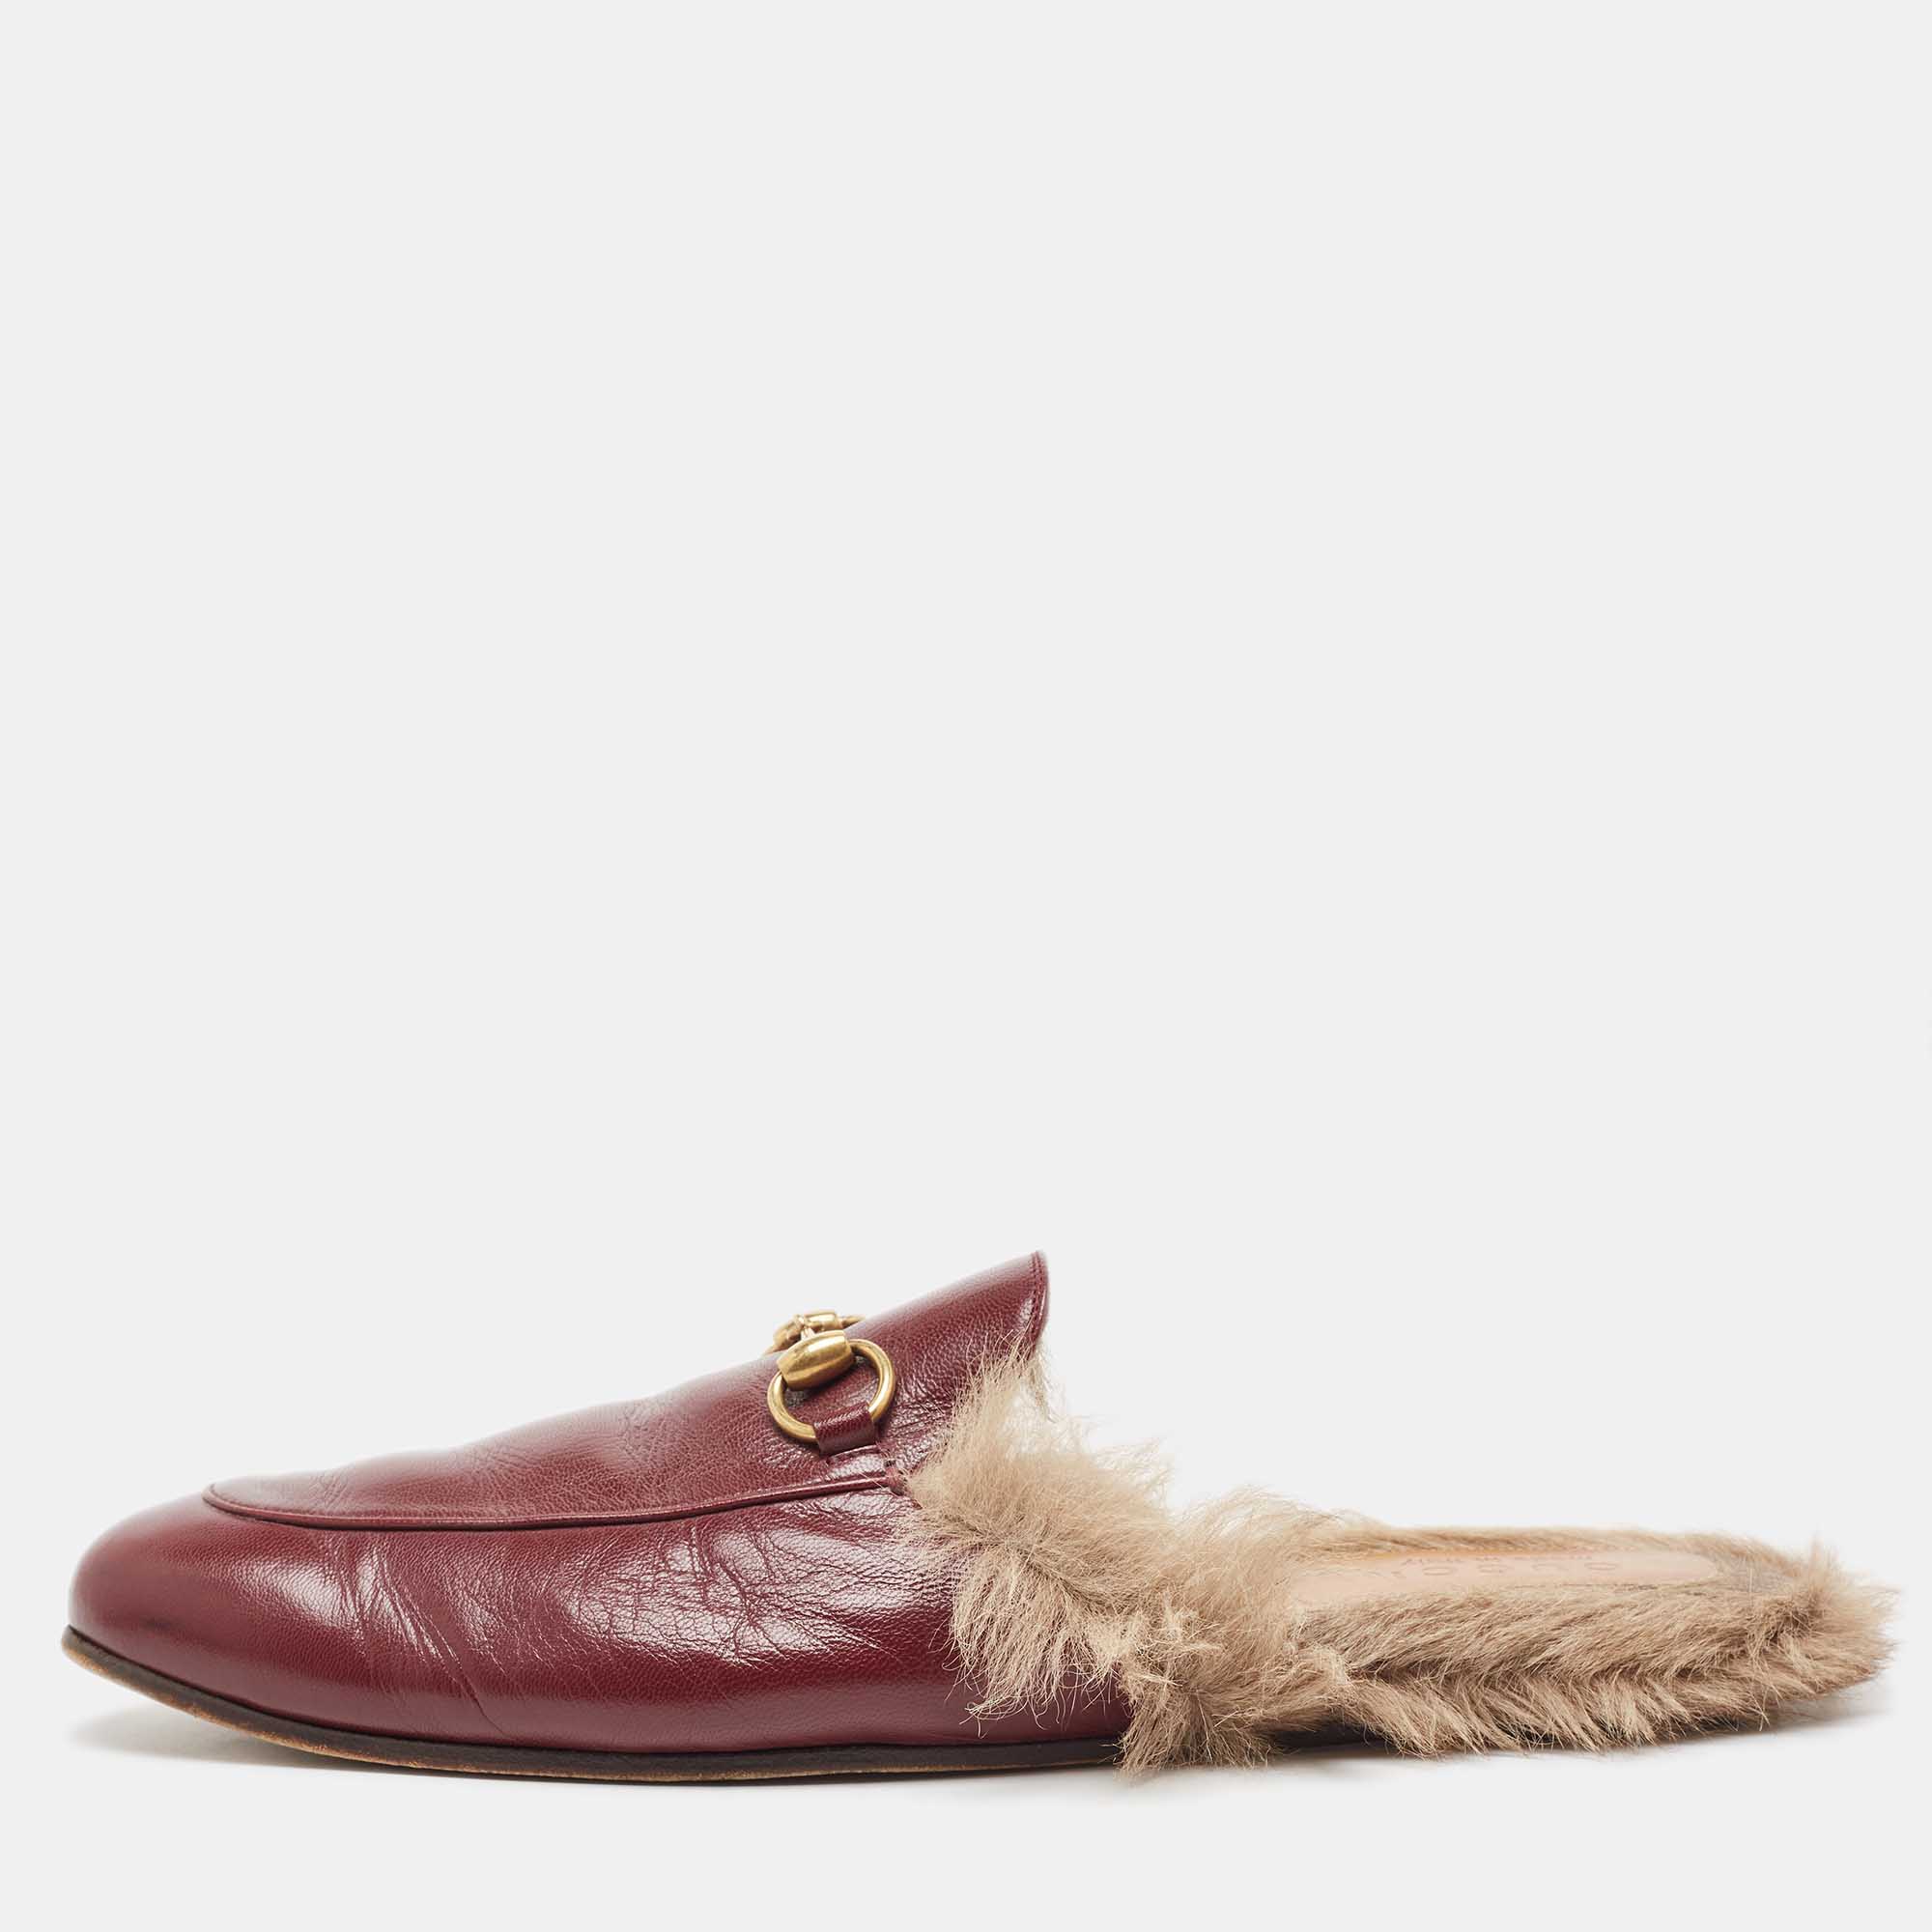 

Gucci Princetown Burgundy Leather and Fur Mules Size